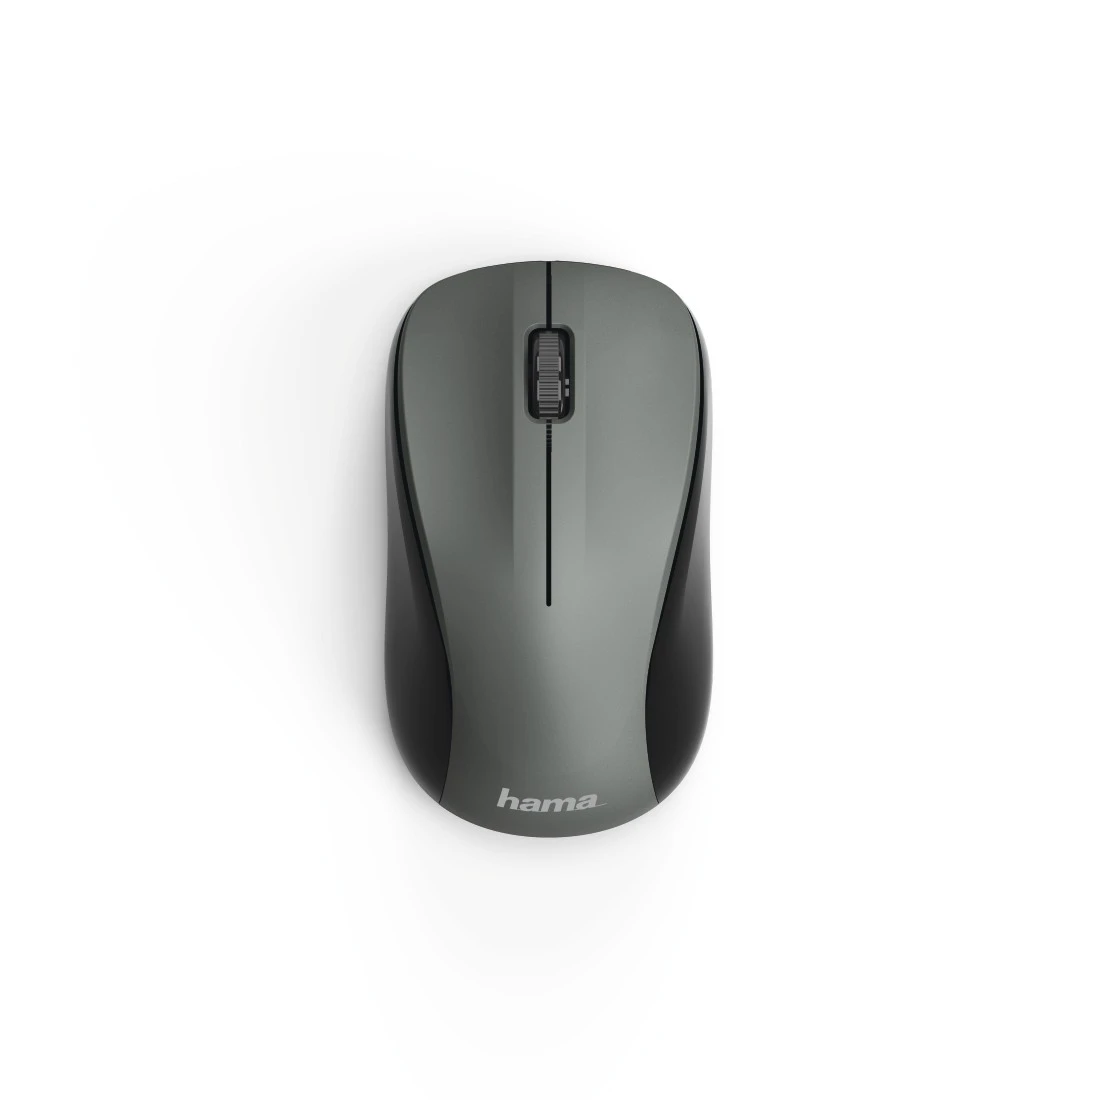 Hama 00182621 MW-300 Optical Wireless Mouse, 3 Buttons, anthracite